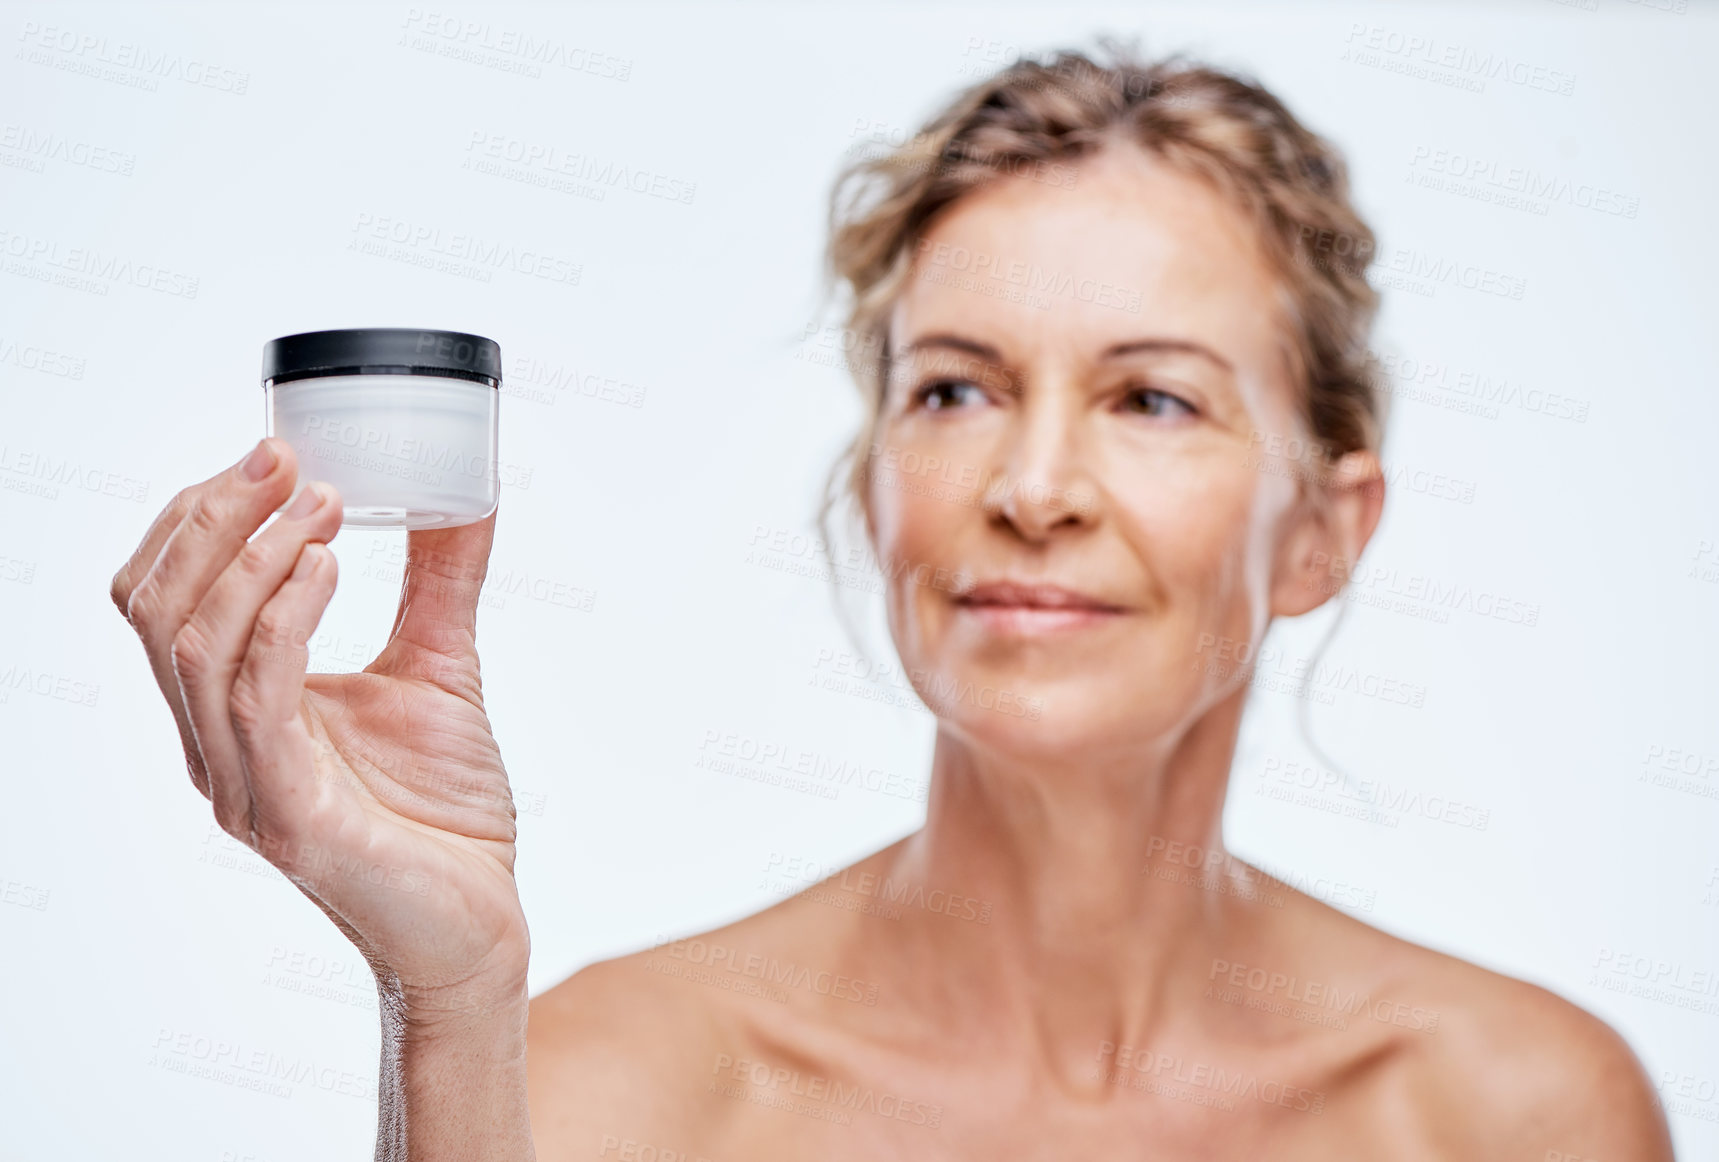 Buy stock photo Shot of a mature woman holding up a beauty product against a while background